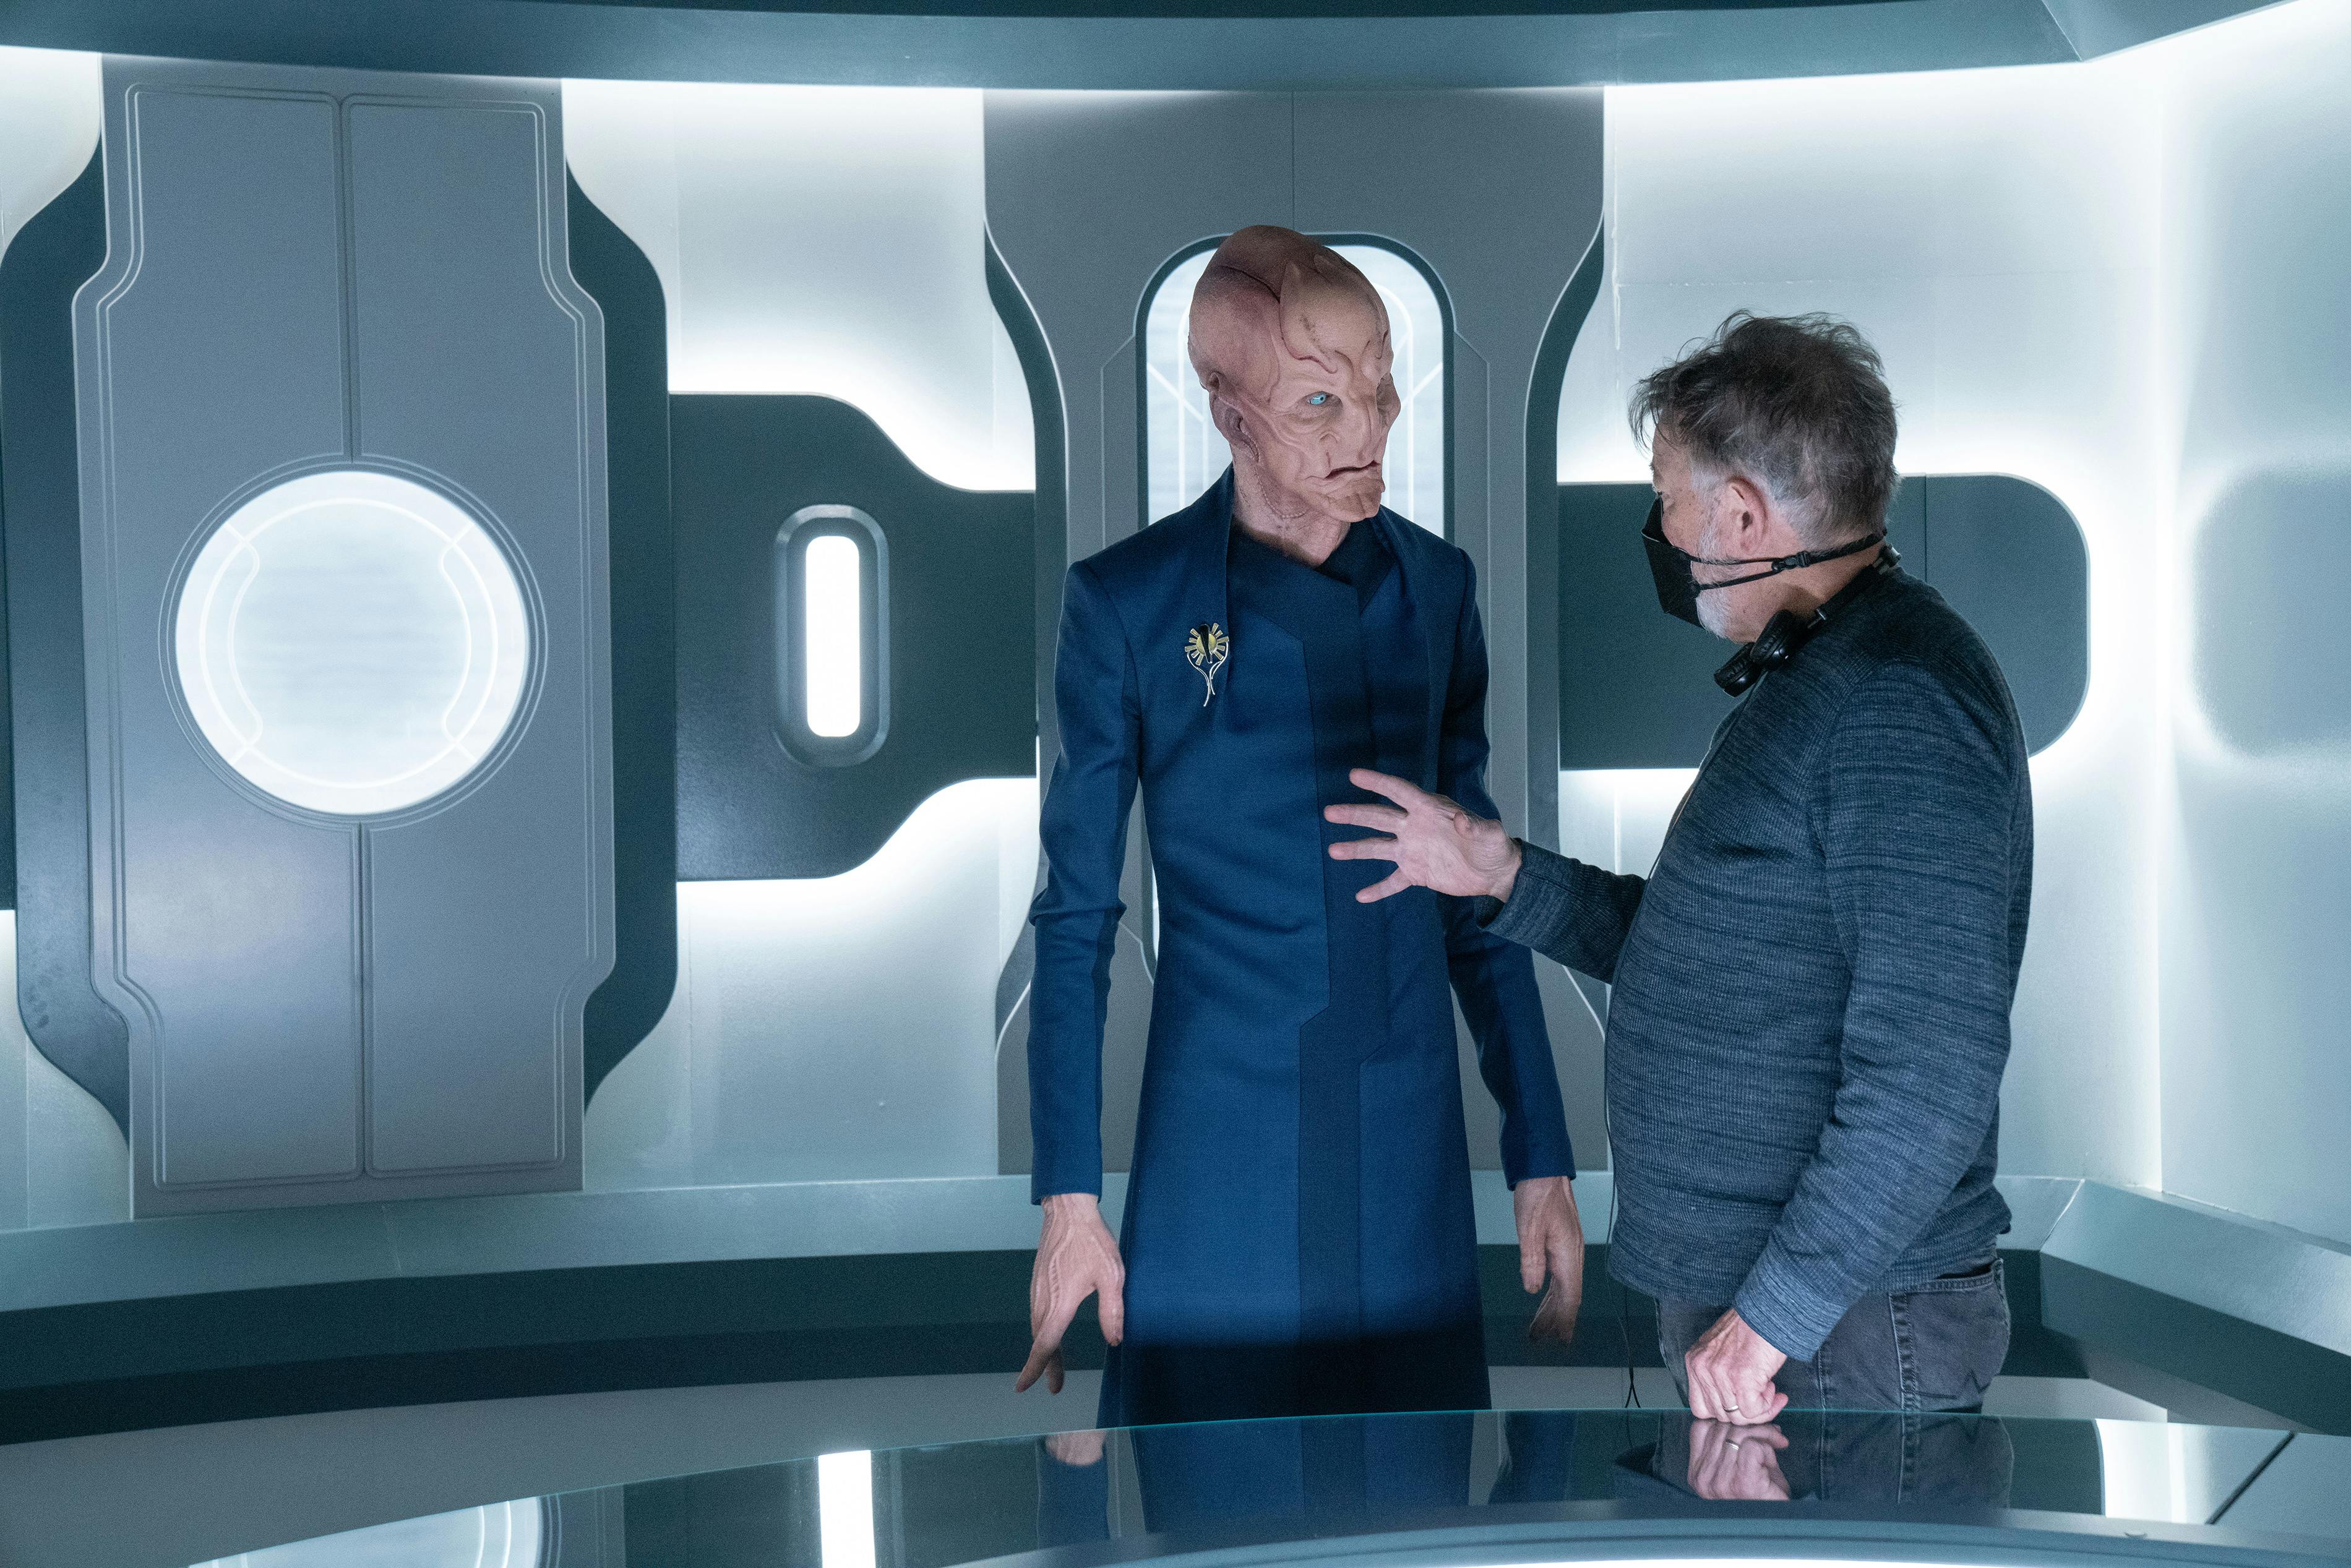 Behind-the-scenes of 'Lagrange Point' - Jonathan Frakes stands besides Doug Jones on the set of Federation Headquarters